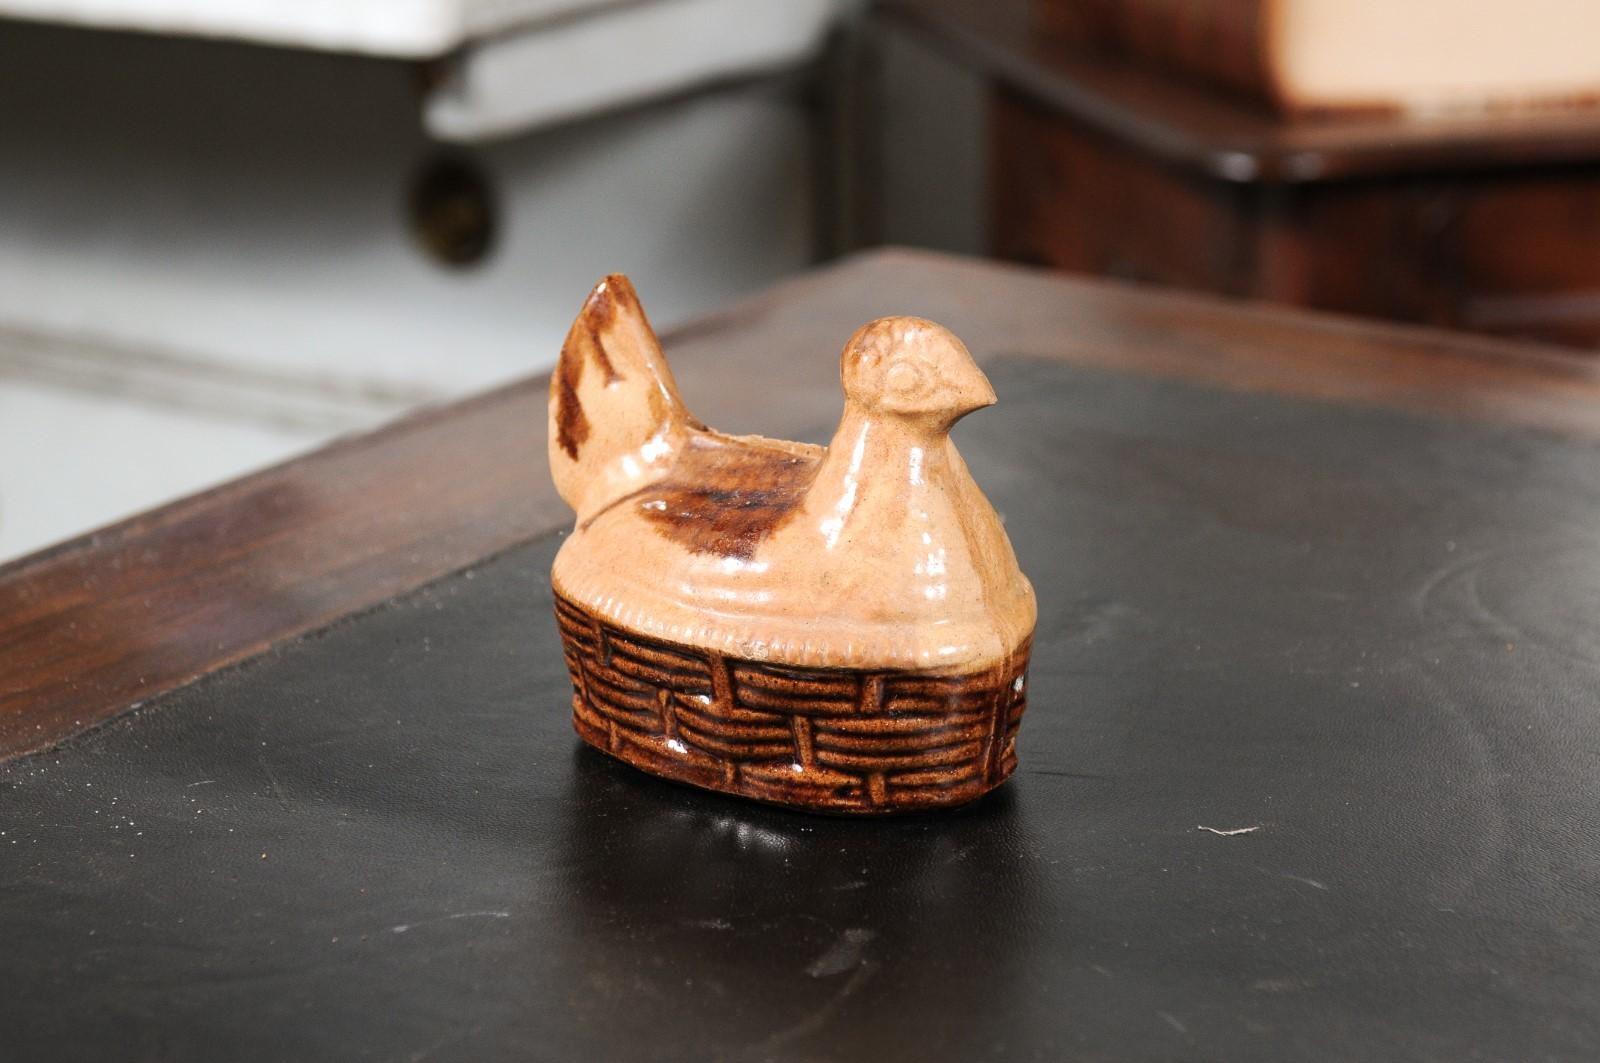 A French glazed majolica chicken bank from the 19th century, with wicker style base. Created in France during the 19th century, this glazed majolica bank depicts a chicken laying on a wicker style base. Boasting brown and cream tones, this 19th